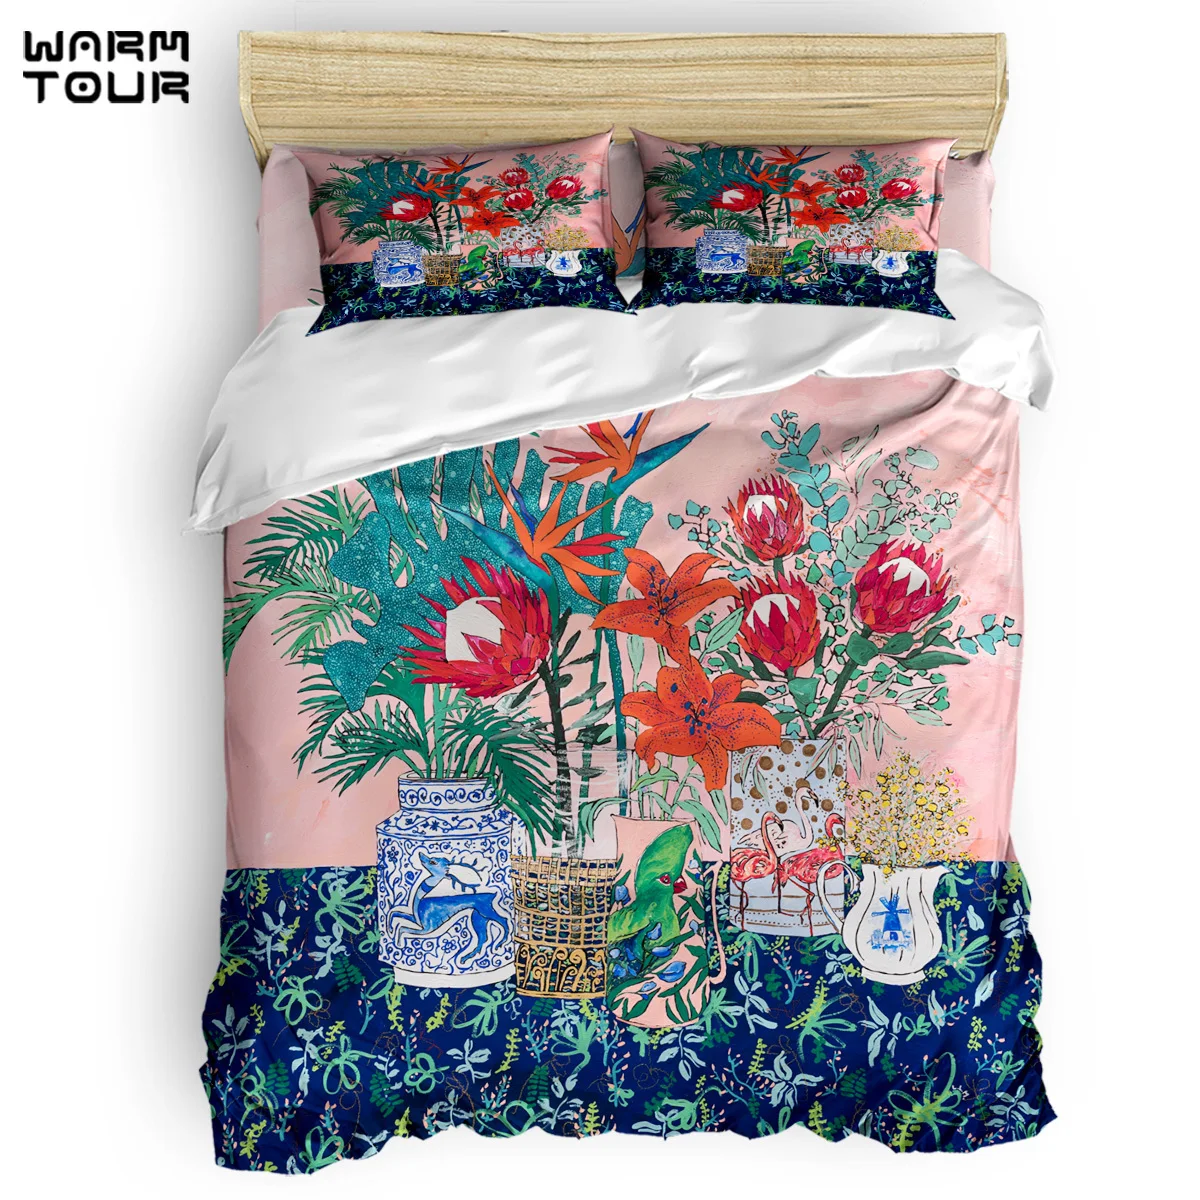 Фото WARMTOUR Duvet Cover The Domesticated Jungle - Floral Still Life Set 4 Piece Bedding For Beds |